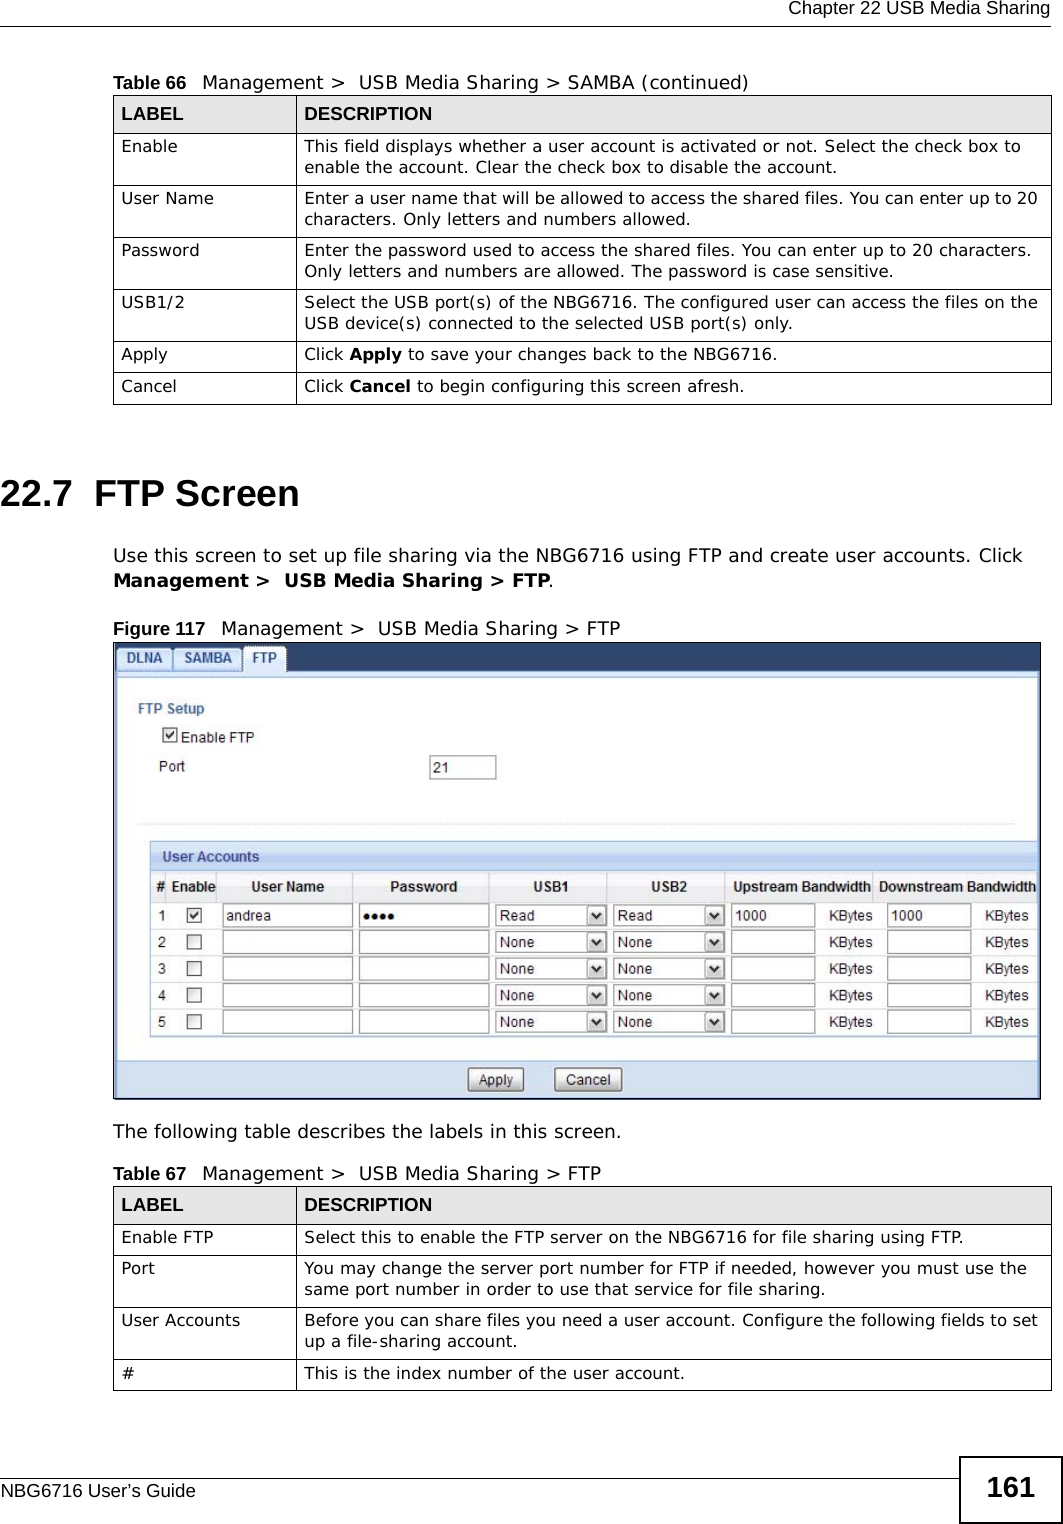  Chapter 22 USB Media SharingNBG6716 User’s Guide 16122.7  FTP ScreenUse this screen to set up file sharing via the NBG6716 using FTP and create user accounts. Click Management &gt;  USB Media Sharing &gt; FTP.Figure 117   Management &gt;  USB Media Sharing &gt; FTP The following table describes the labels in this screen.Enable This field displays whether a user account is activated or not. Select the check box to enable the account. Clear the check box to disable the account.User Name Enter a user name that will be allowed to access the shared files. You can enter up to 20 characters. Only letters and numbers allowed.Password Enter the password used to access the shared files. You can enter up to 20 characters. Only letters and numbers are allowed. The password is case sensitive.USB1/2 Select the USB port(s) of the NBG6716. The configured user can access the files on the USB device(s) connected to the selected USB port(s) only.Apply Click Apply to save your changes back to the NBG6716.Cancel Click Cancel to begin configuring this screen afresh.Table 66   Management &gt;  USB Media Sharing &gt; SAMBA (continued)LABEL DESCRIPTIONTable 67   Management &gt;  USB Media Sharing &gt; FTPLABEL DESCRIPTIONEnable FTP Select this to enable the FTP server on the NBG6716 for file sharing using FTP.Port You may change the server port number for FTP if needed, however you must use the same port number in order to use that service for file sharing.User Accounts Before you can share files you need a user account. Configure the following fields to set up a file-sharing account. #This is the index number of the user account.